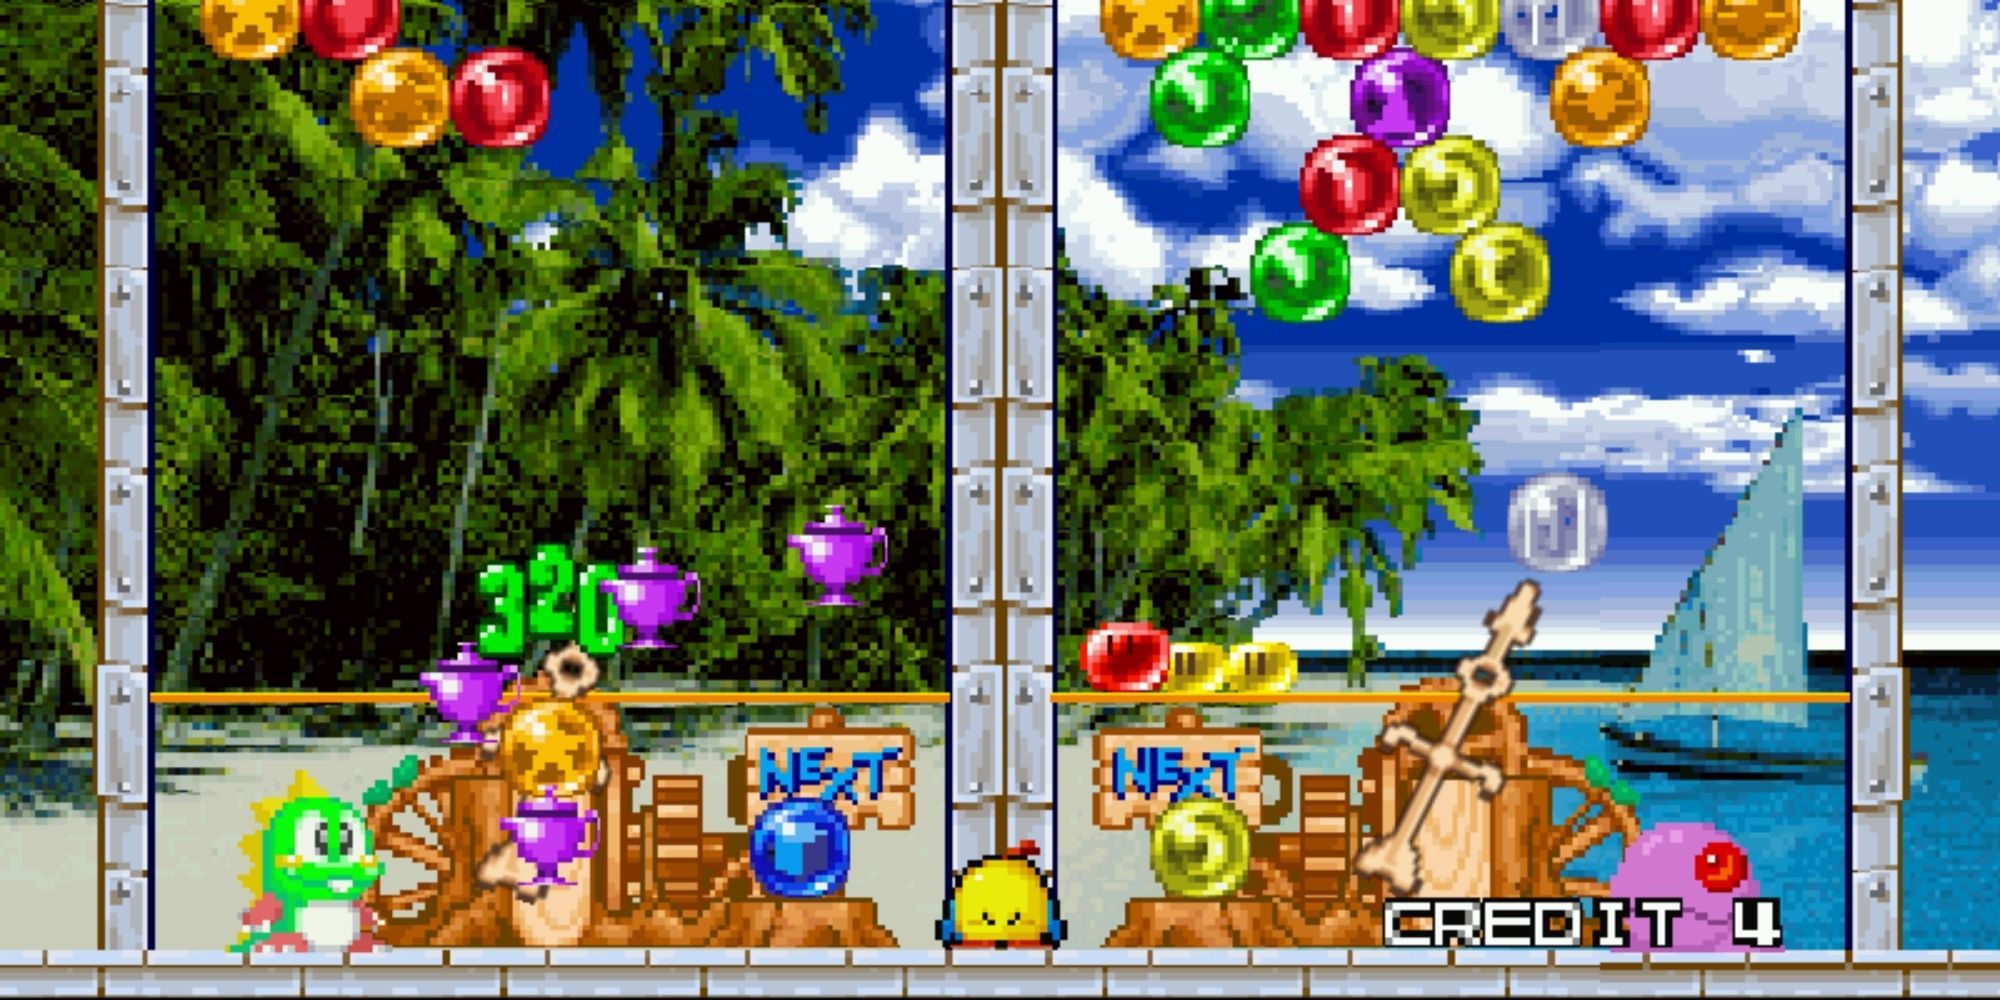 Puzzle Bobble 2 Arena Game against the computer. The game is set against a beach style background, Bub is the player character and Monsta is the computer.